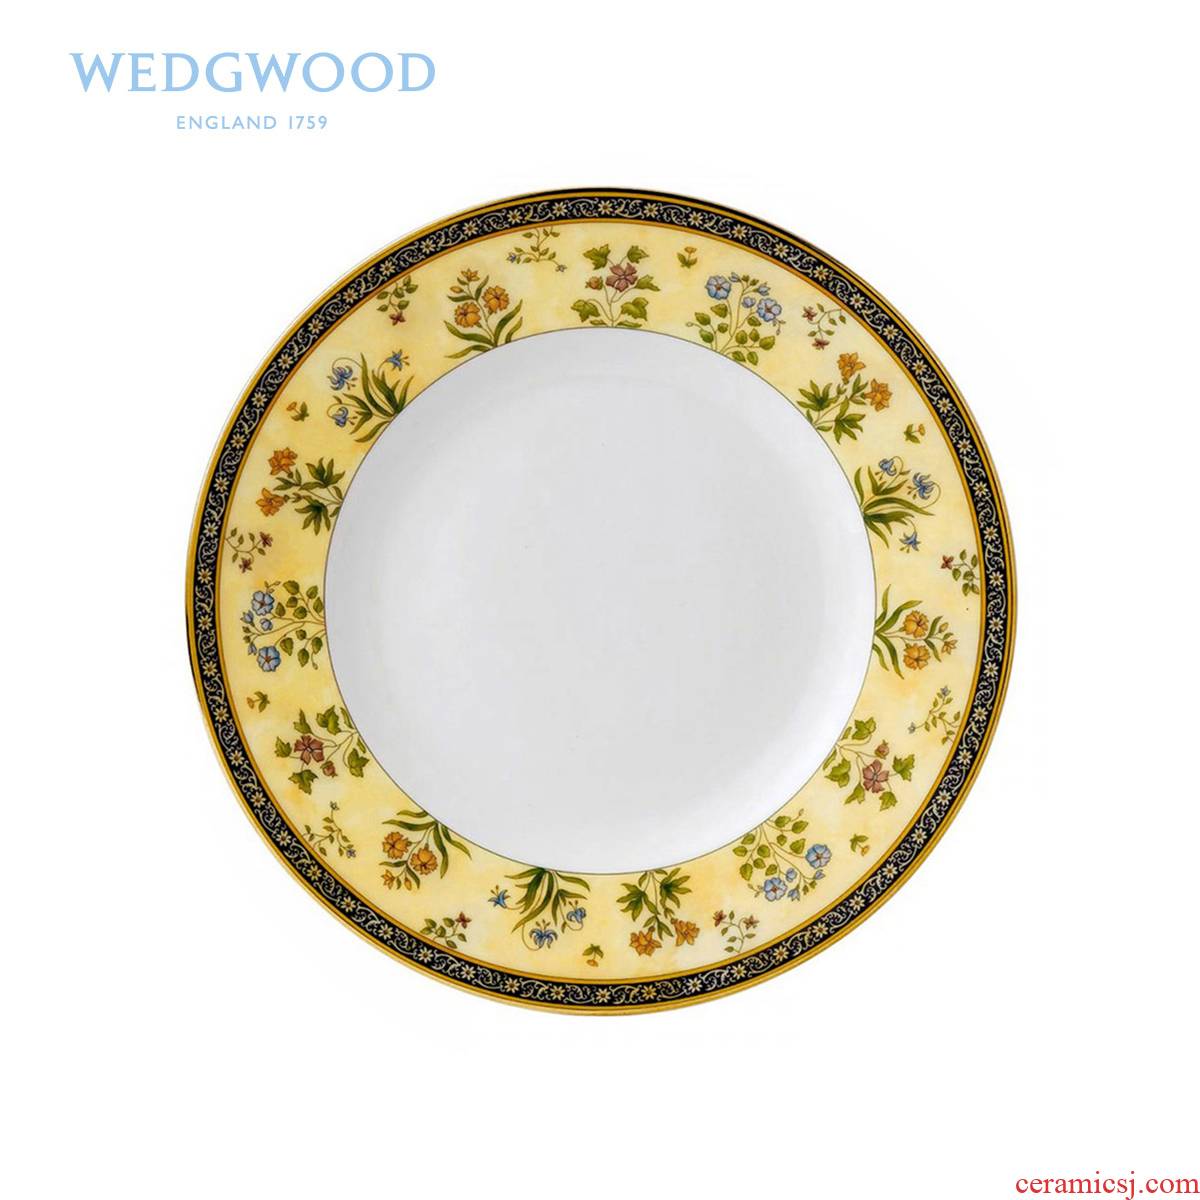 Wedgwood waterford Wedgwood India India spend 20/31 cm ipads porcelain plates for the only western dishes